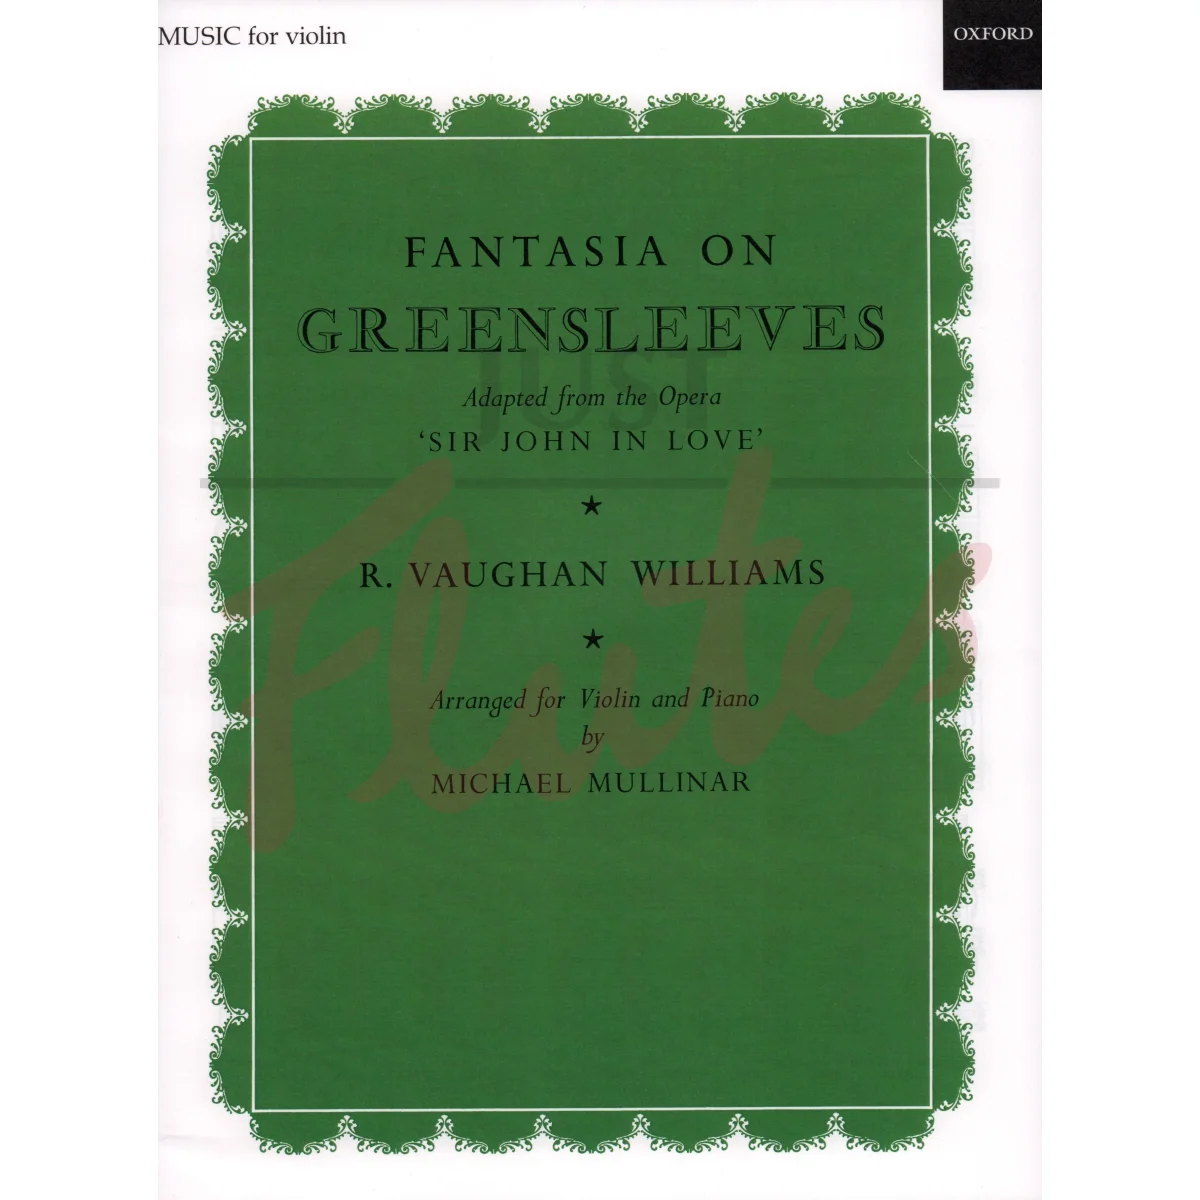 Fantasia On Greensleeves for Violin and Piano